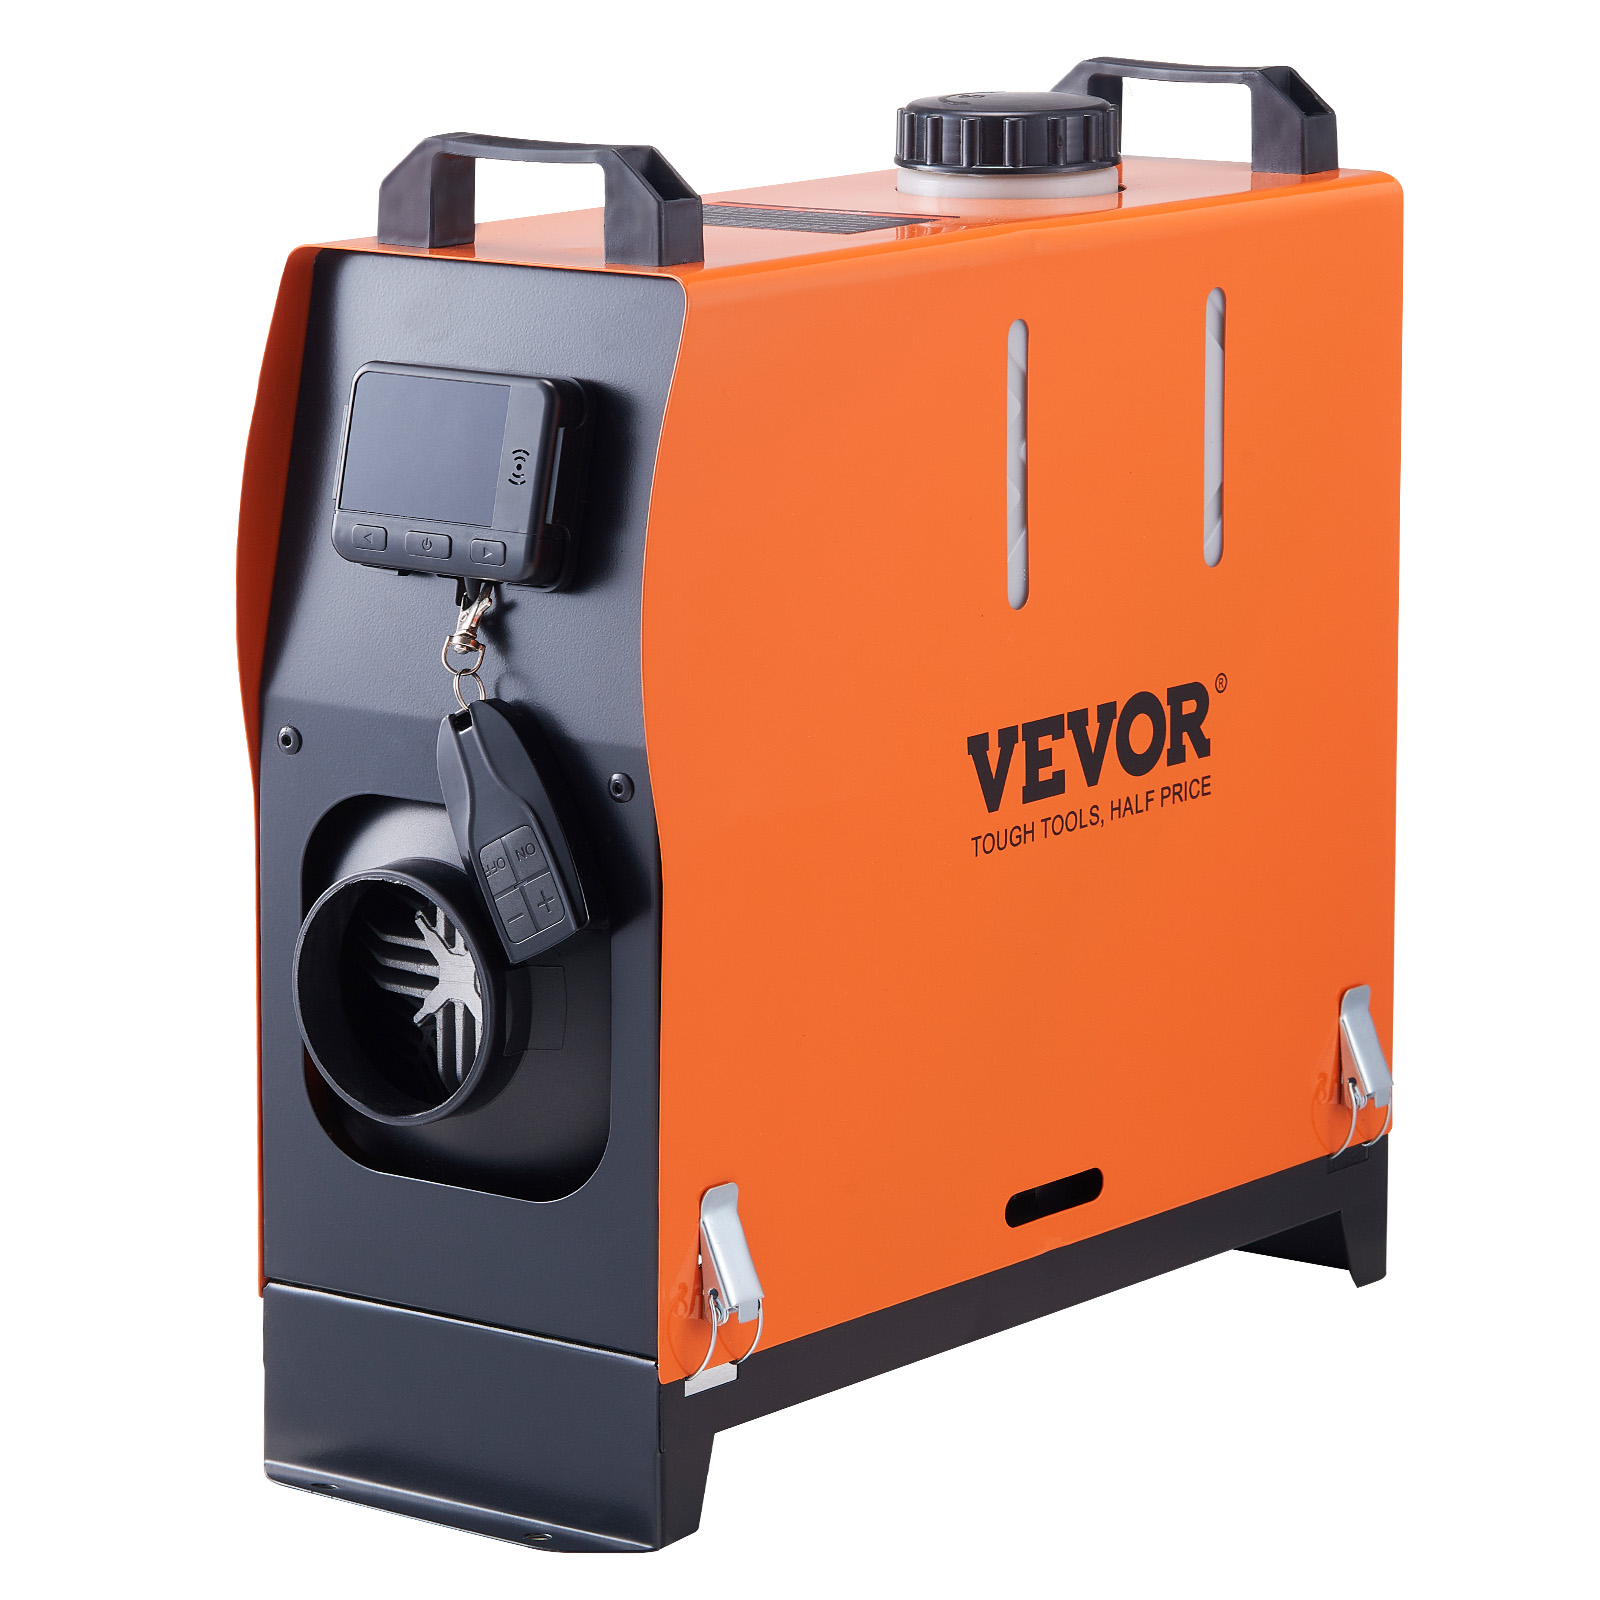 VEVOR VEVOR Diesel Air Heater All-in-one 12V 5KW LCD Remote Control for Car  RV Indoors